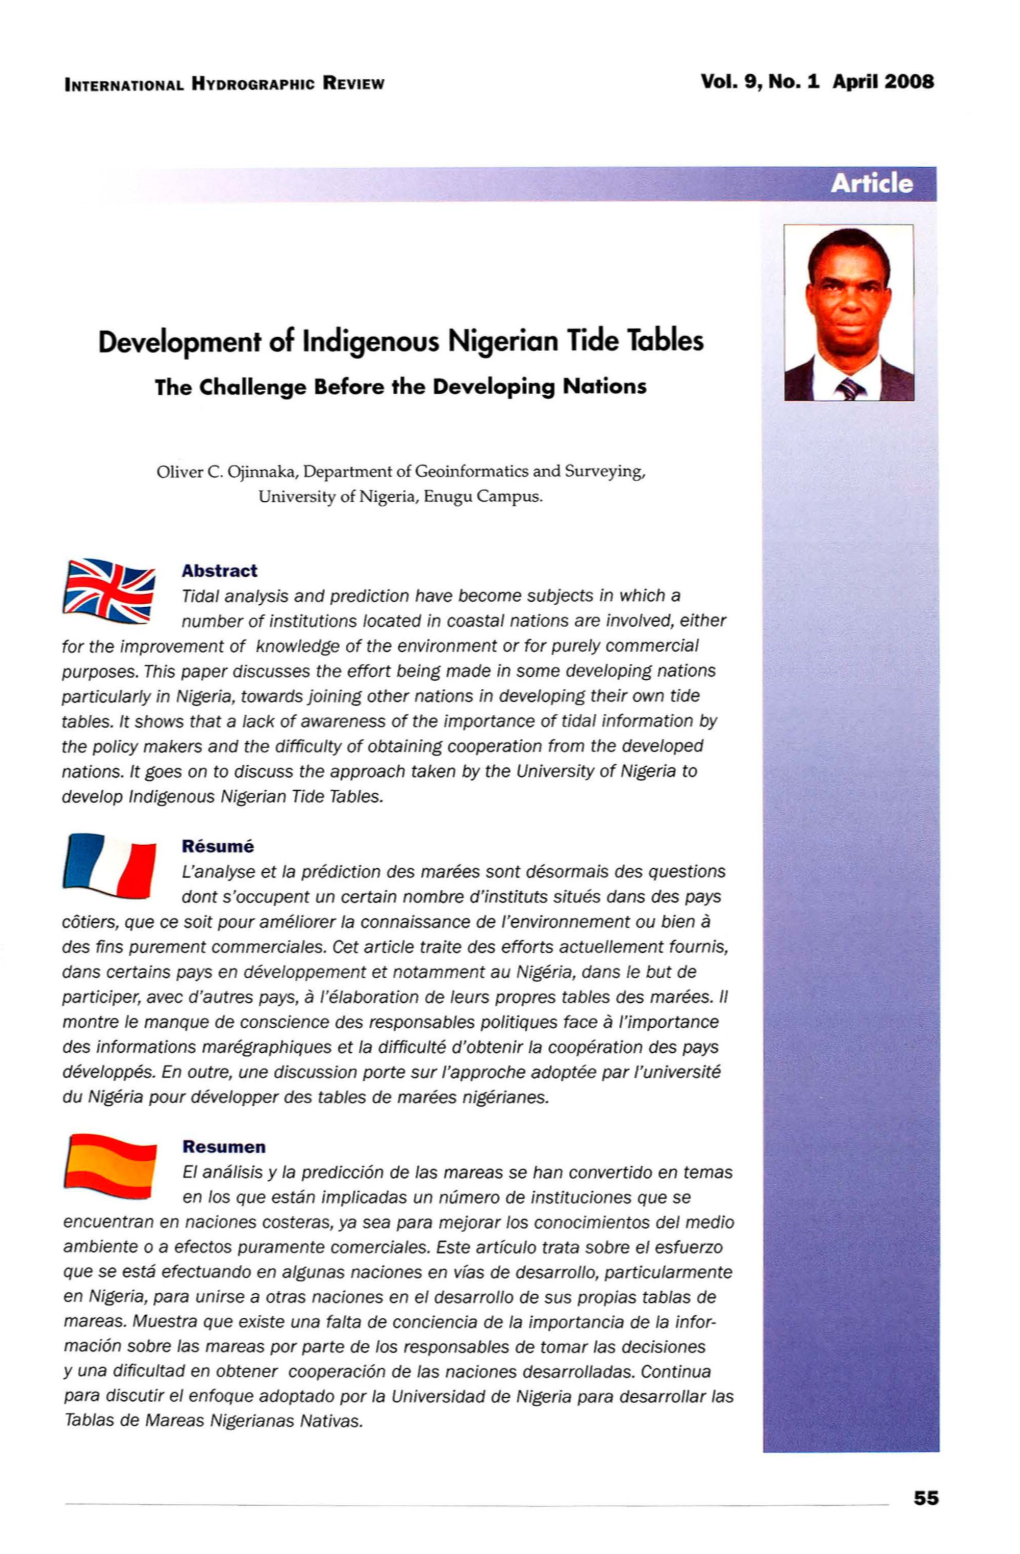 Development of Indigenous Nigerian Tide Tables the Challenge Before the Developing Nations